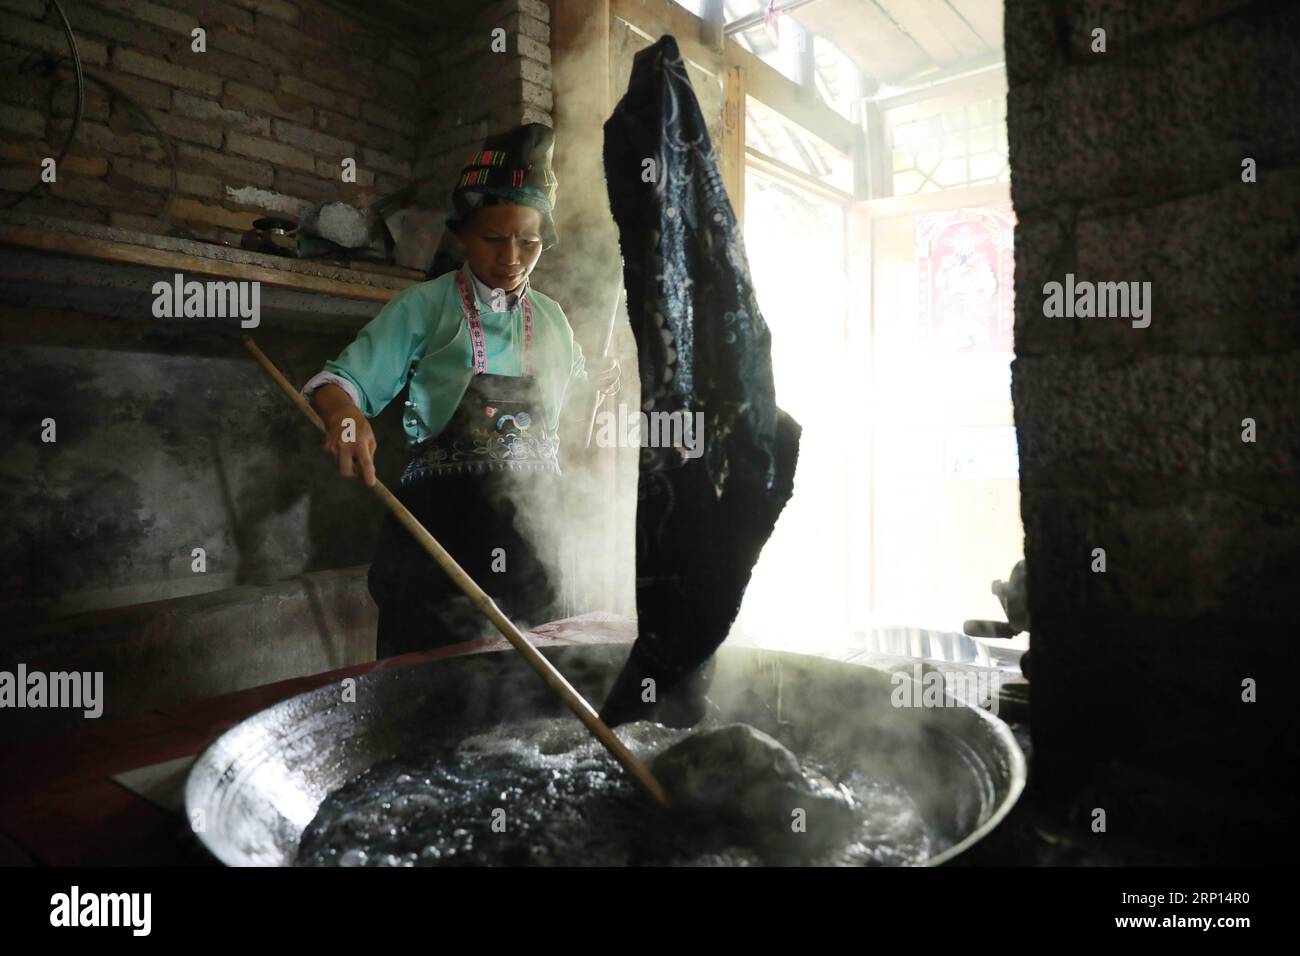 (180609) -- DANZHAI, June 9, 2018 -- A woman of miao ethnic group makes batik products in Yangwu Town of Danzhai County, southwest China s Guizhou Province, June 8, 2018. Miao people s batik handicraft is one of China s national intangible heritages. As the major inheritance site of Miao people s batik handicraft, Jijia Miao Village of Yangwu Town has a good many excellent craftspeople, but the inconvenient traffic had impeded the sale of batik products to the outside before 2017. With the increasing improvement of traffic and assistance from local government and volunteers since 2017, people Stock Photo